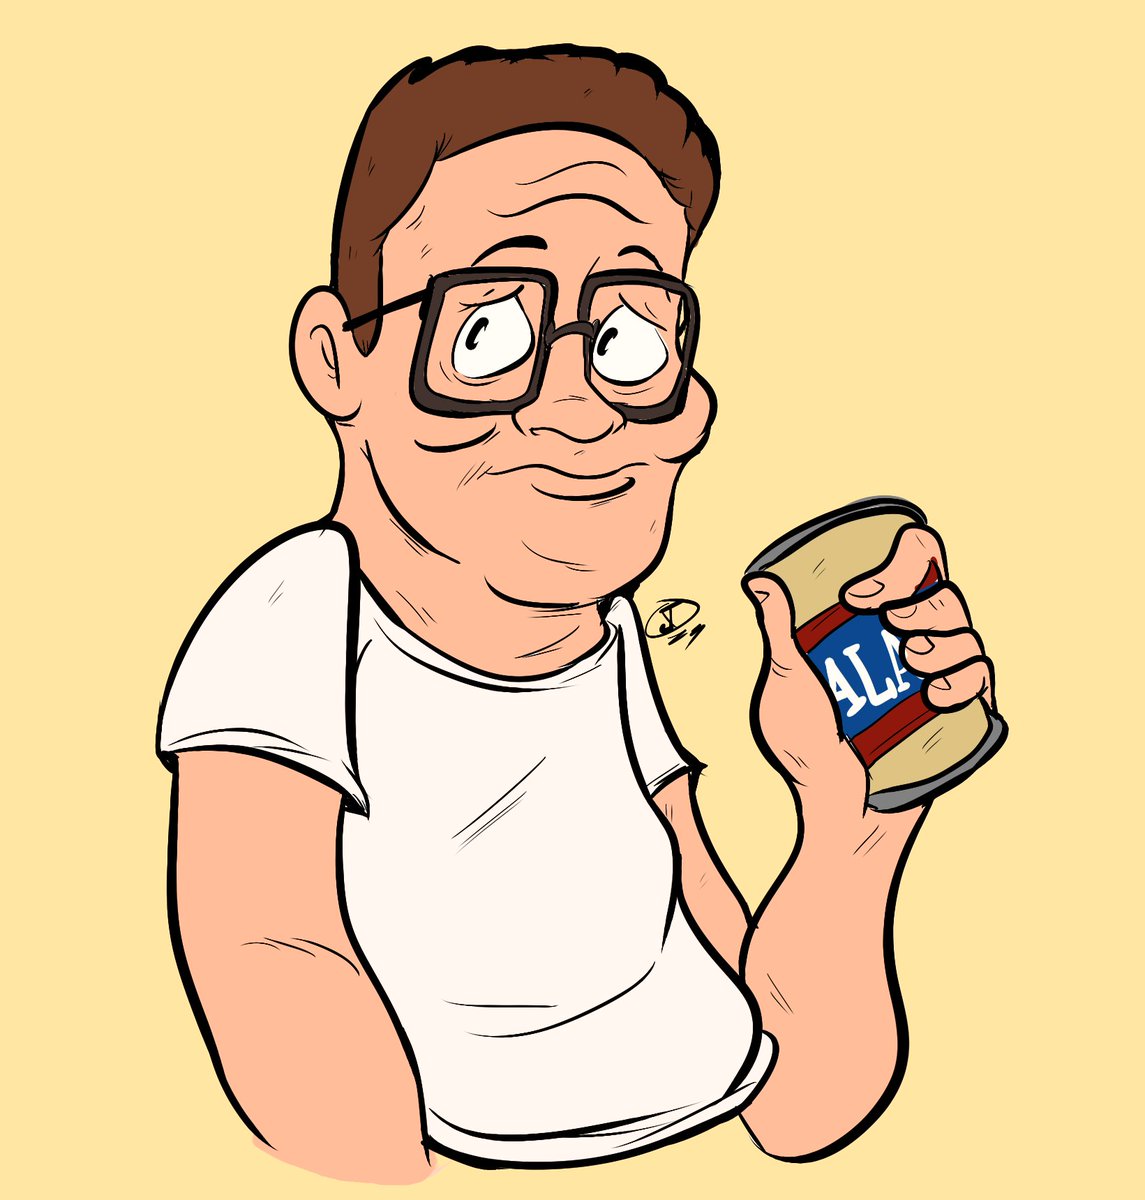 「Propane and Propane Accessories」|DumbNBass (Comms OPEN)のイラスト